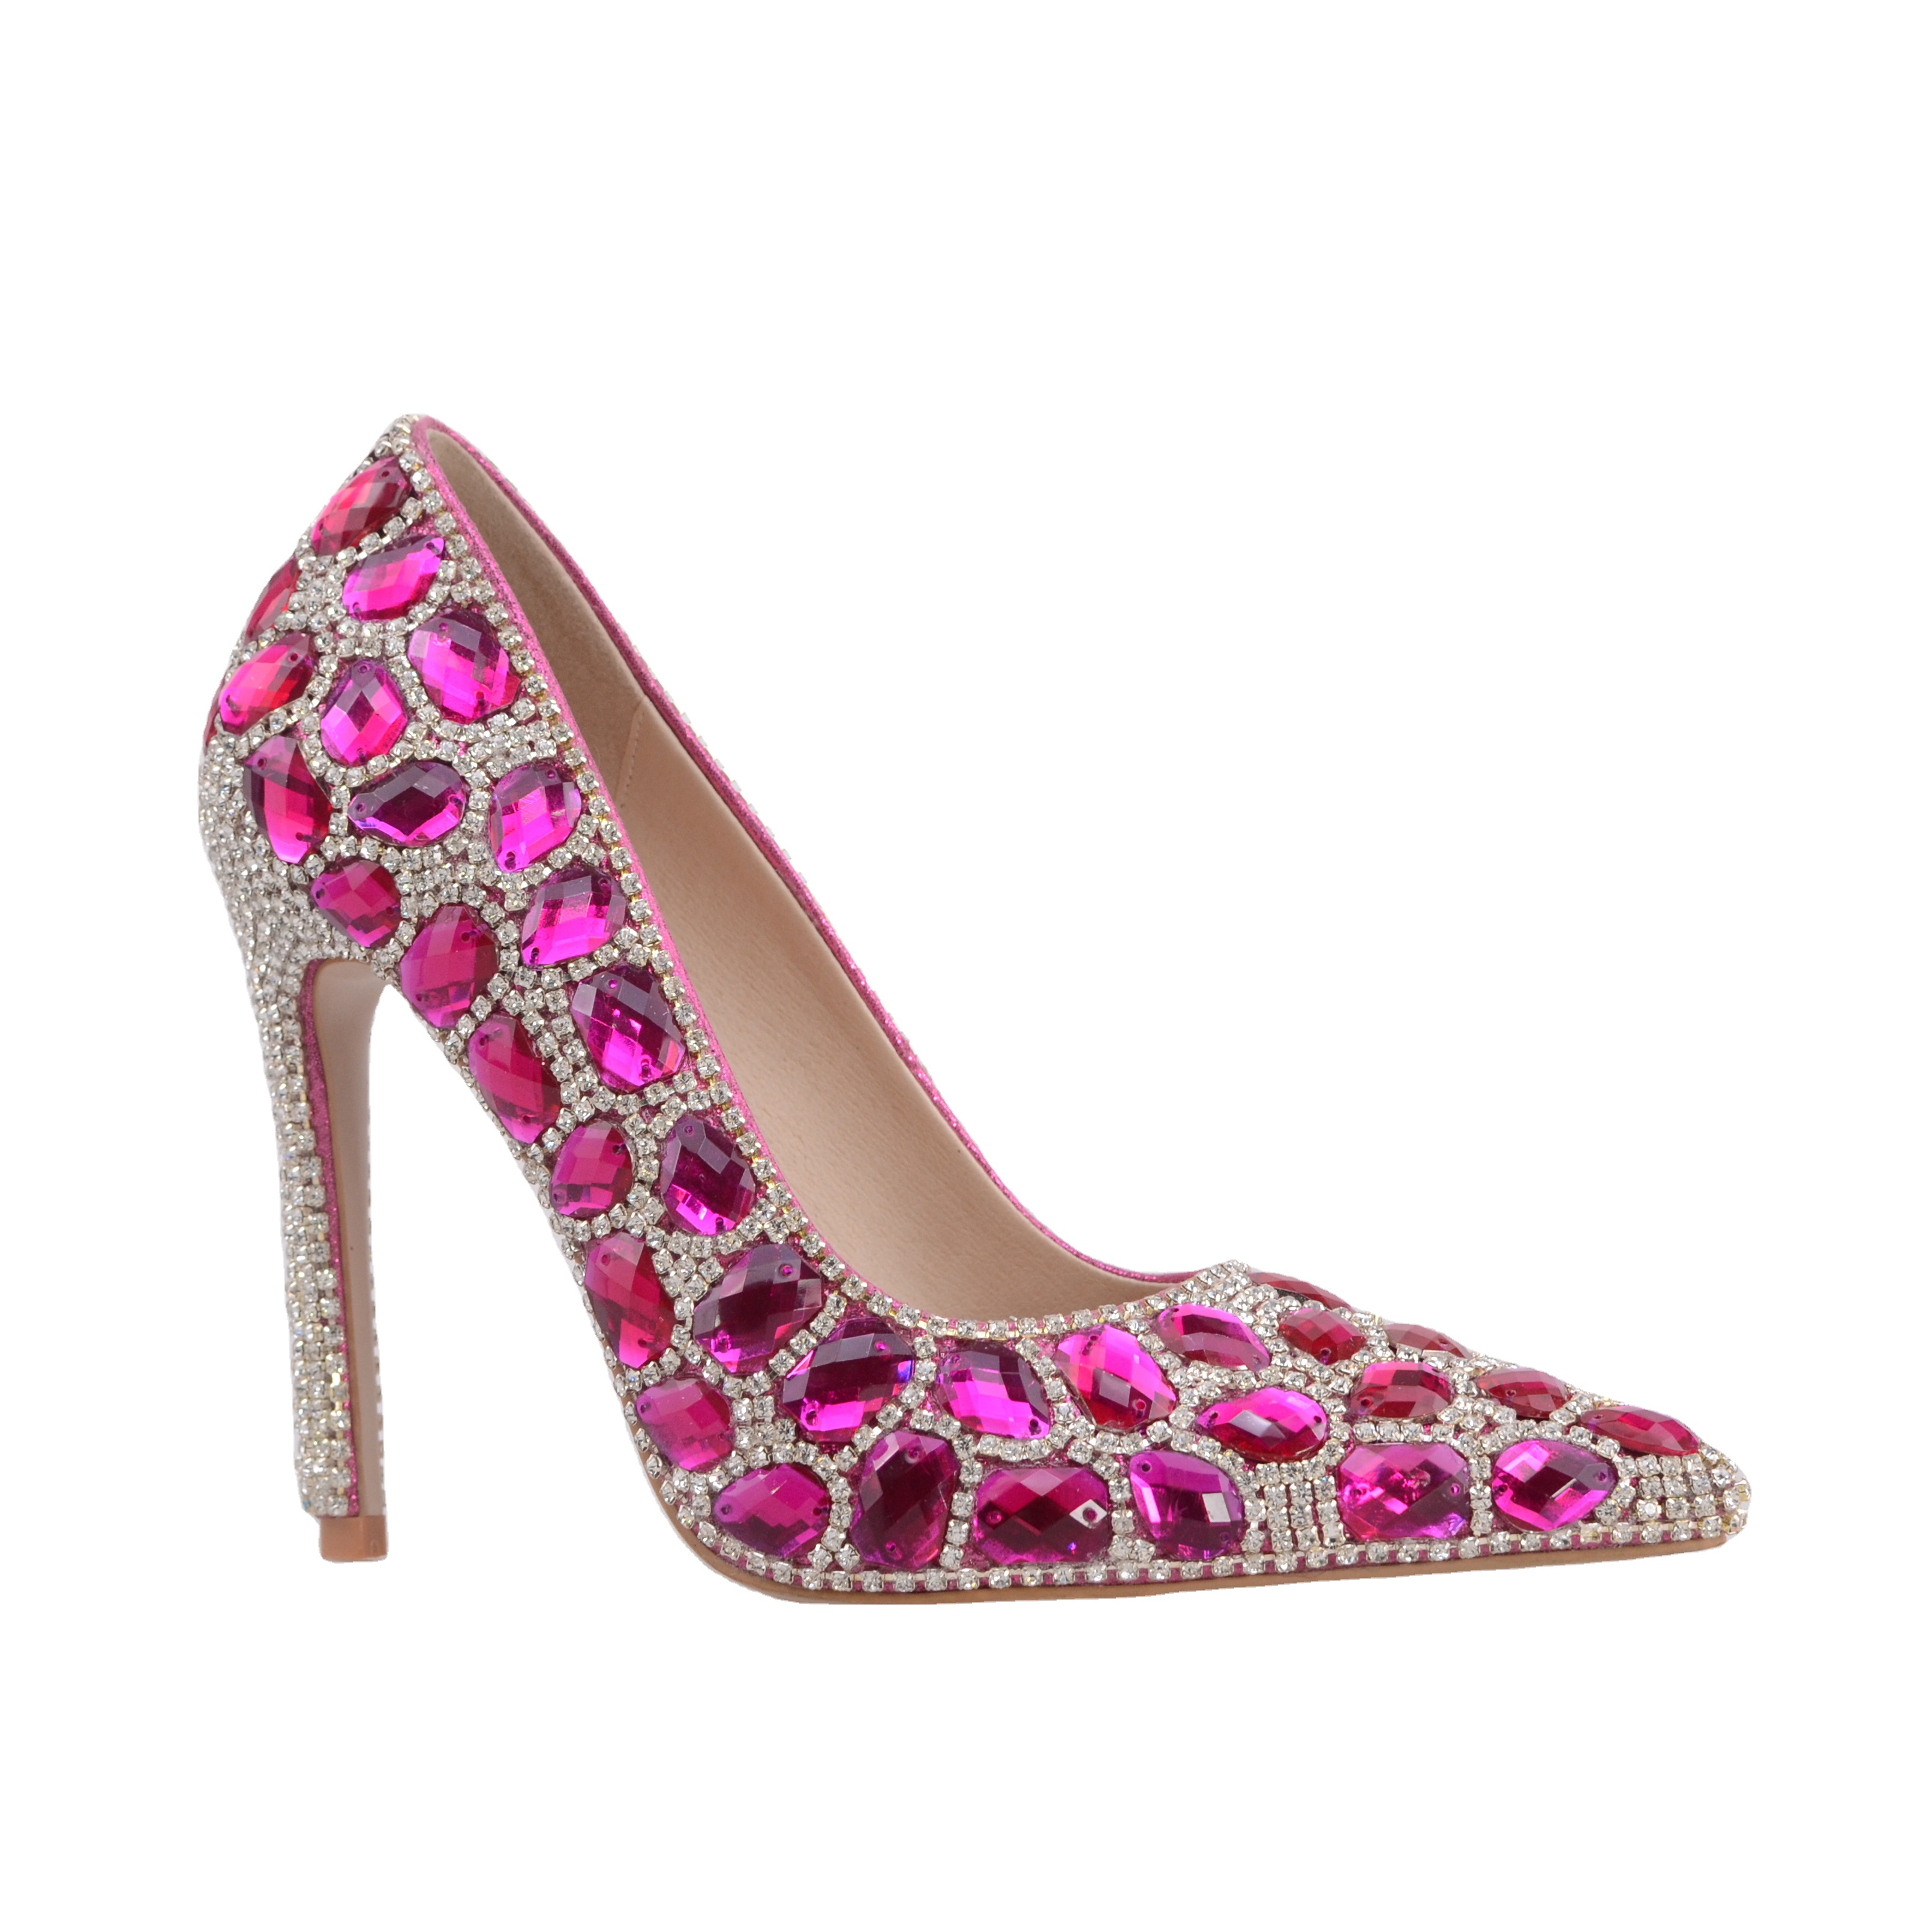 TAAFO Pink High Heel Rehine Stone Lady Shoes